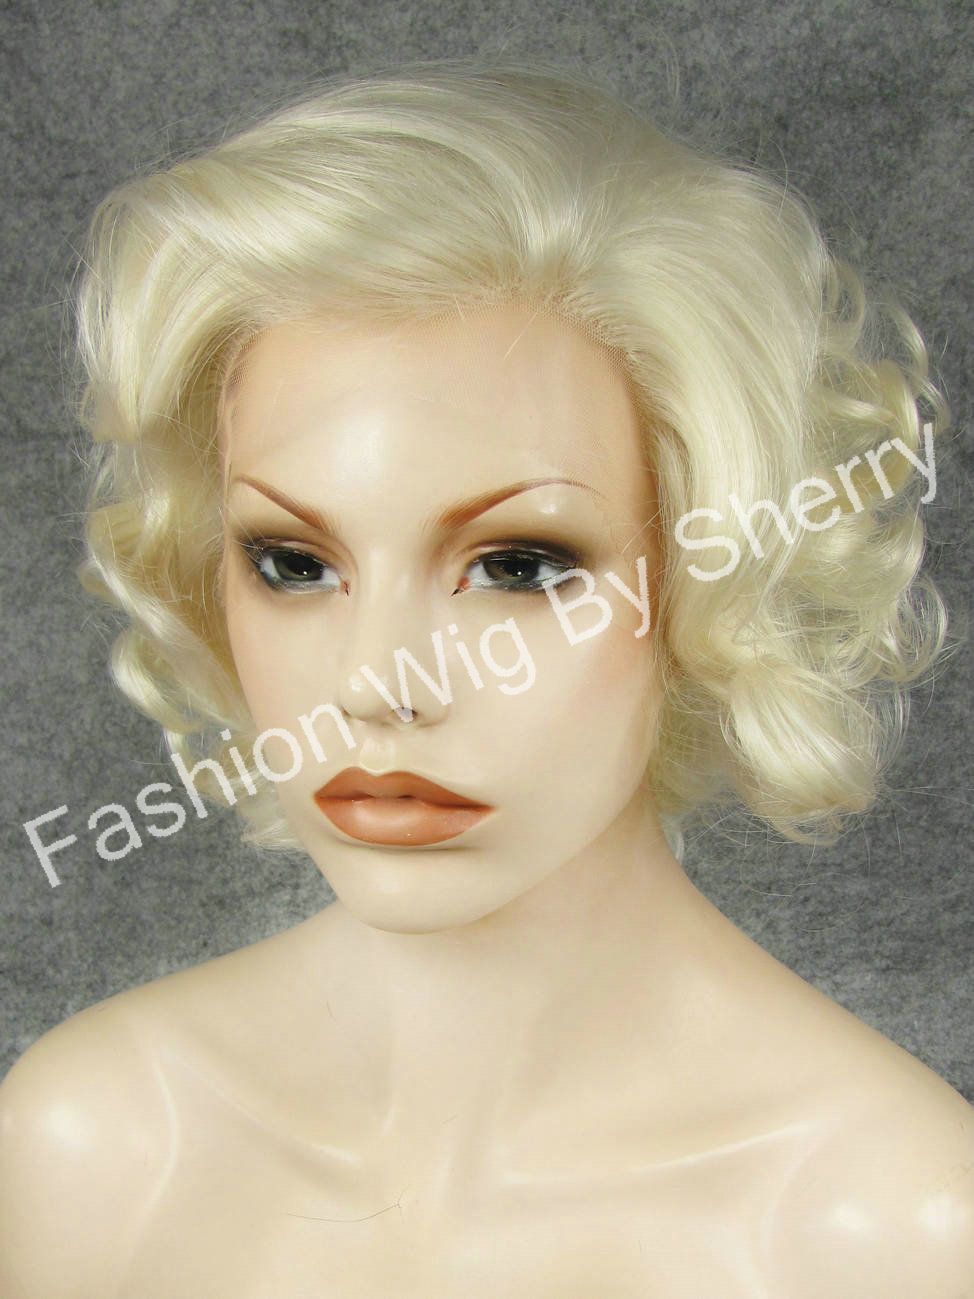 10" Platinum Blonde Wig Curly Blonde Heat Friendly Synthetic Hair Front Lace Wavy Short Wig